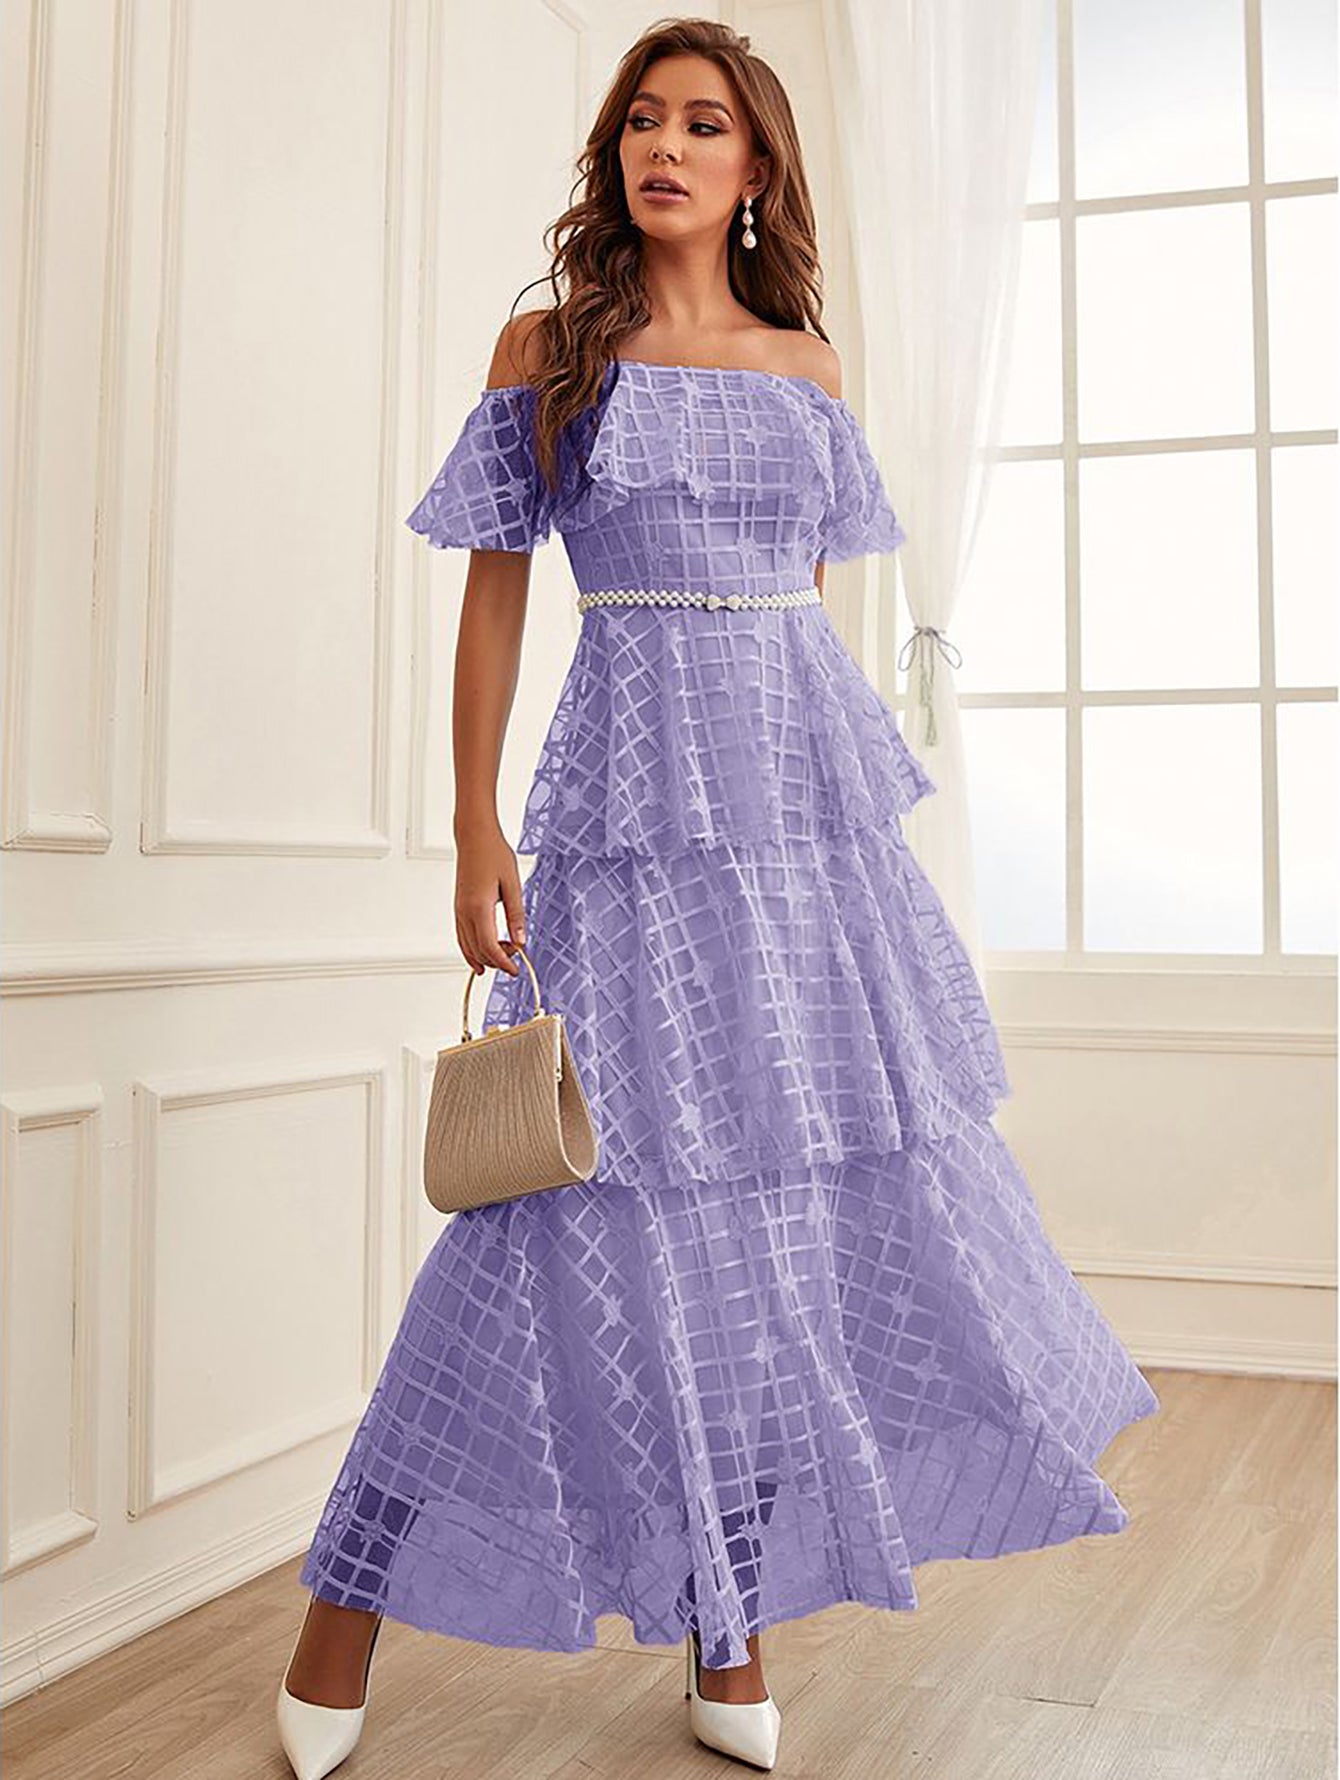 Strapless Off The Shoulder Purple Layered Dress